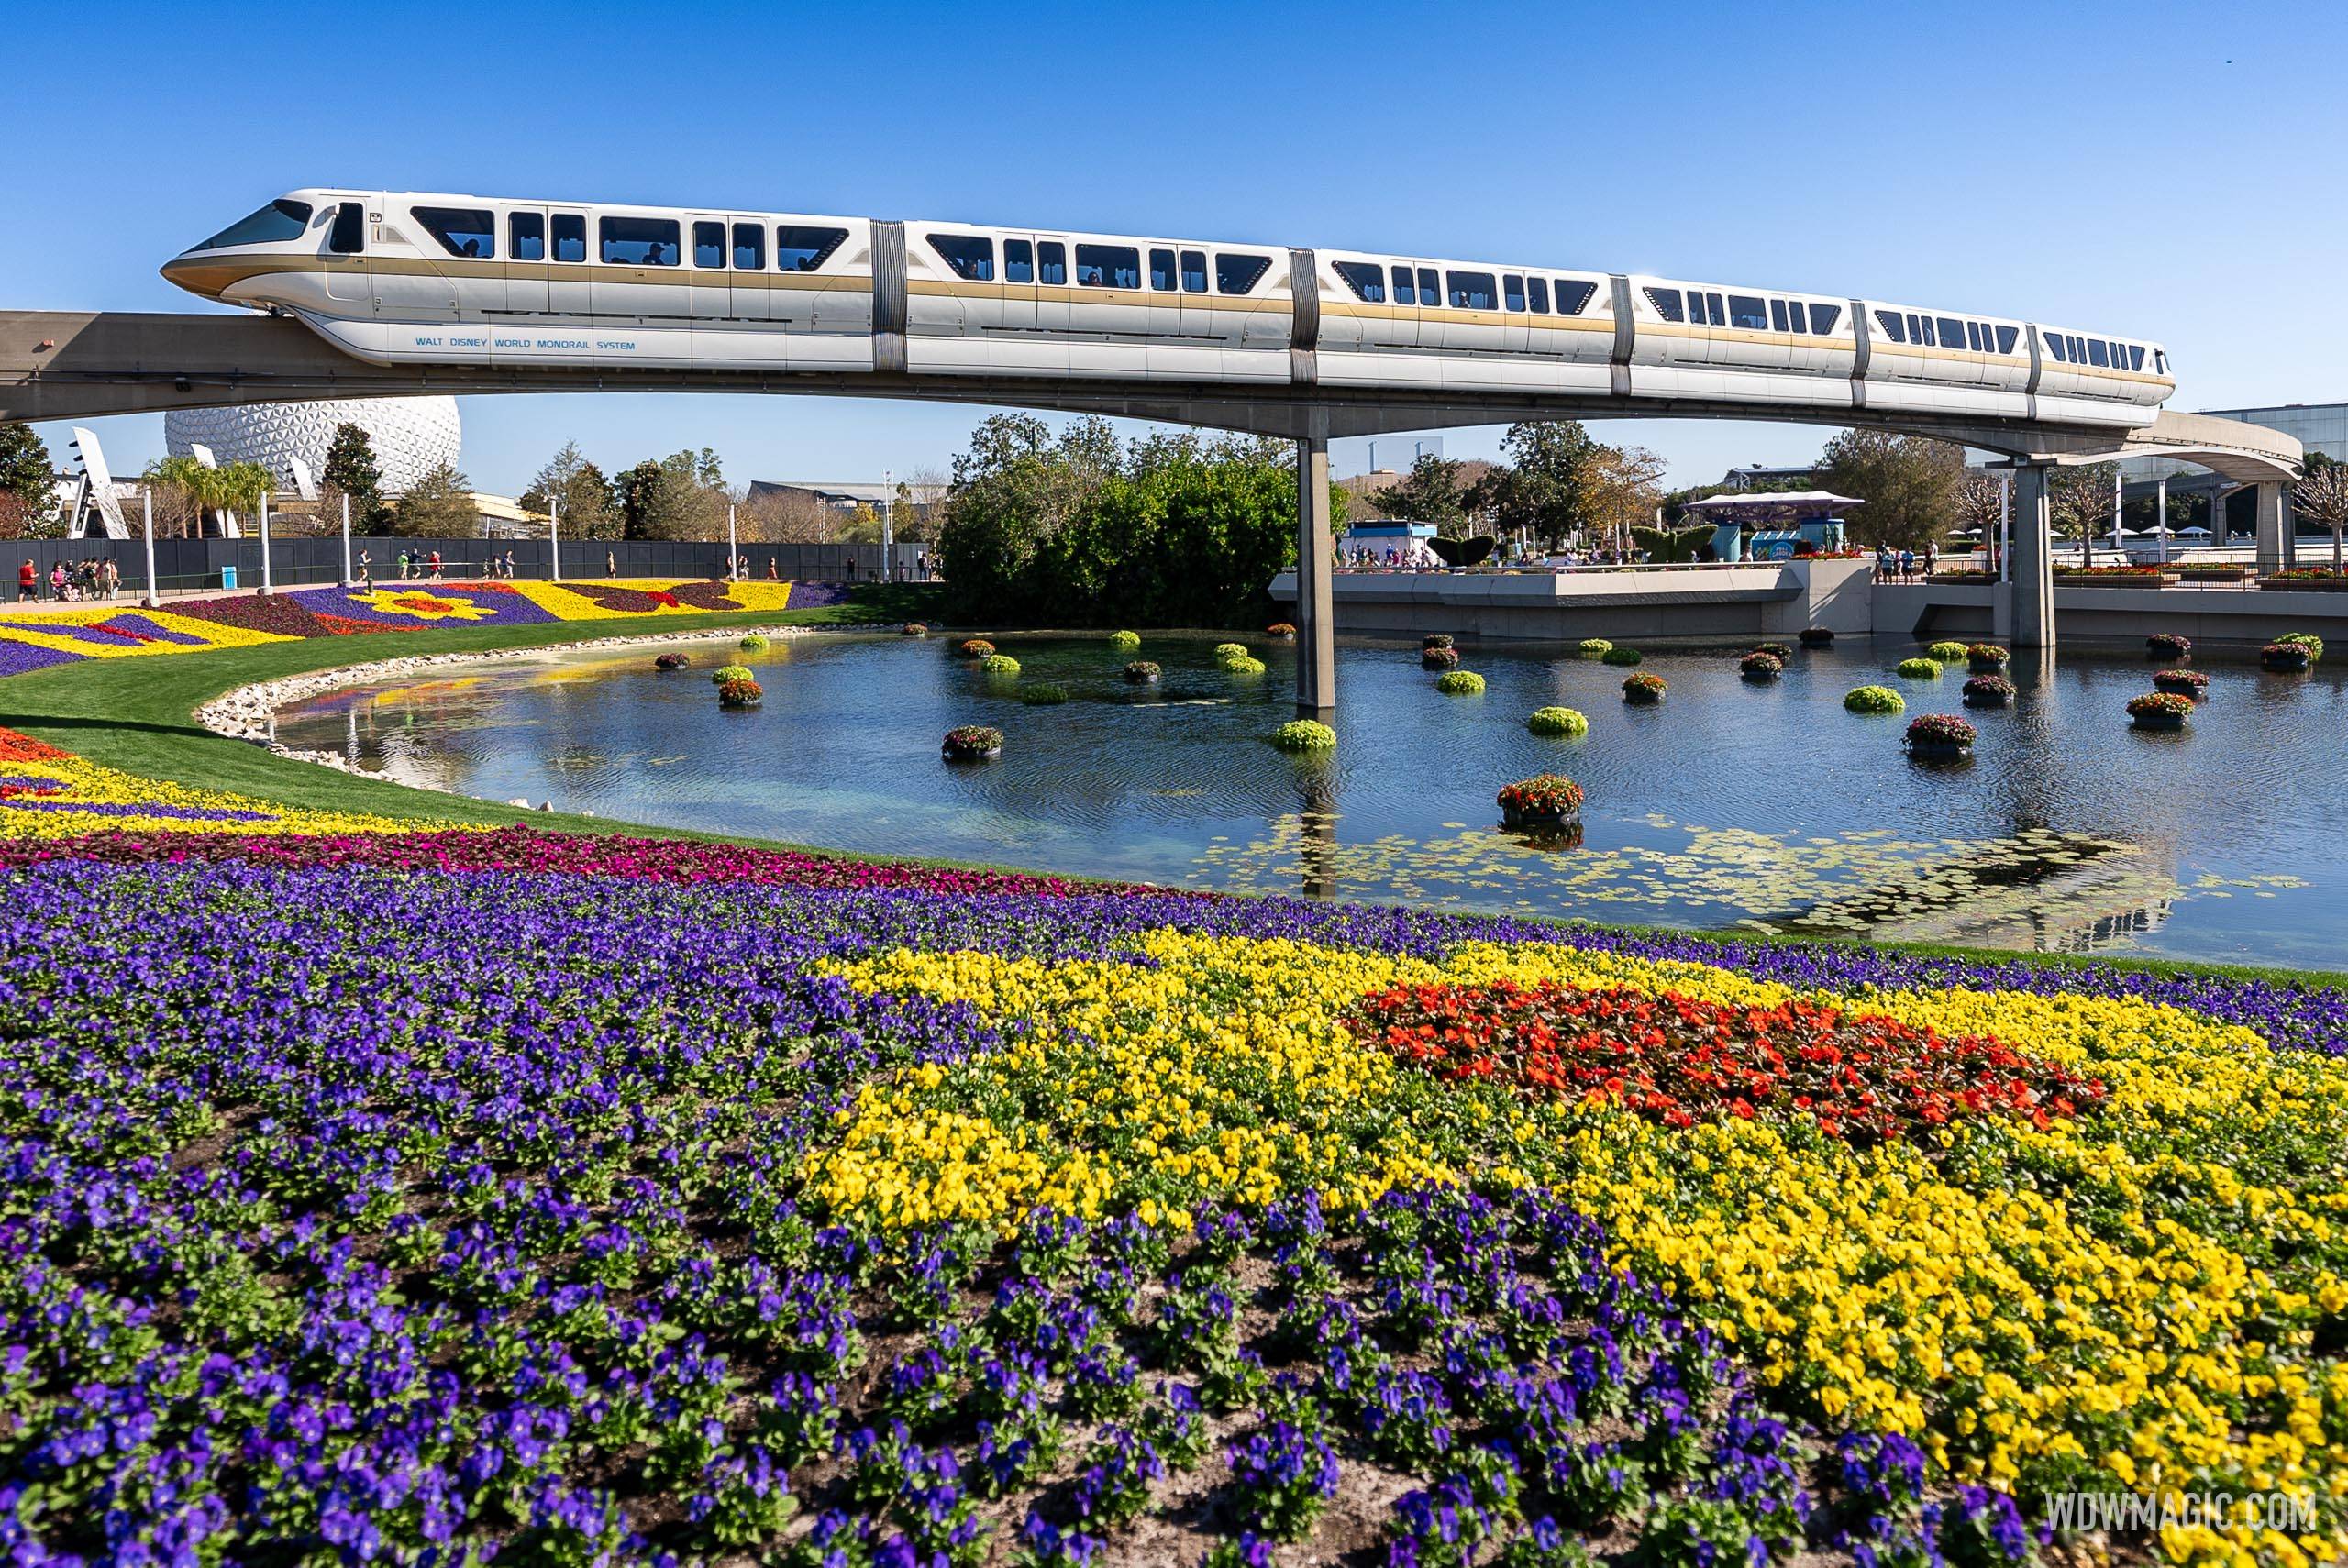 EPCOT monorail during the Flower and Garden Festival